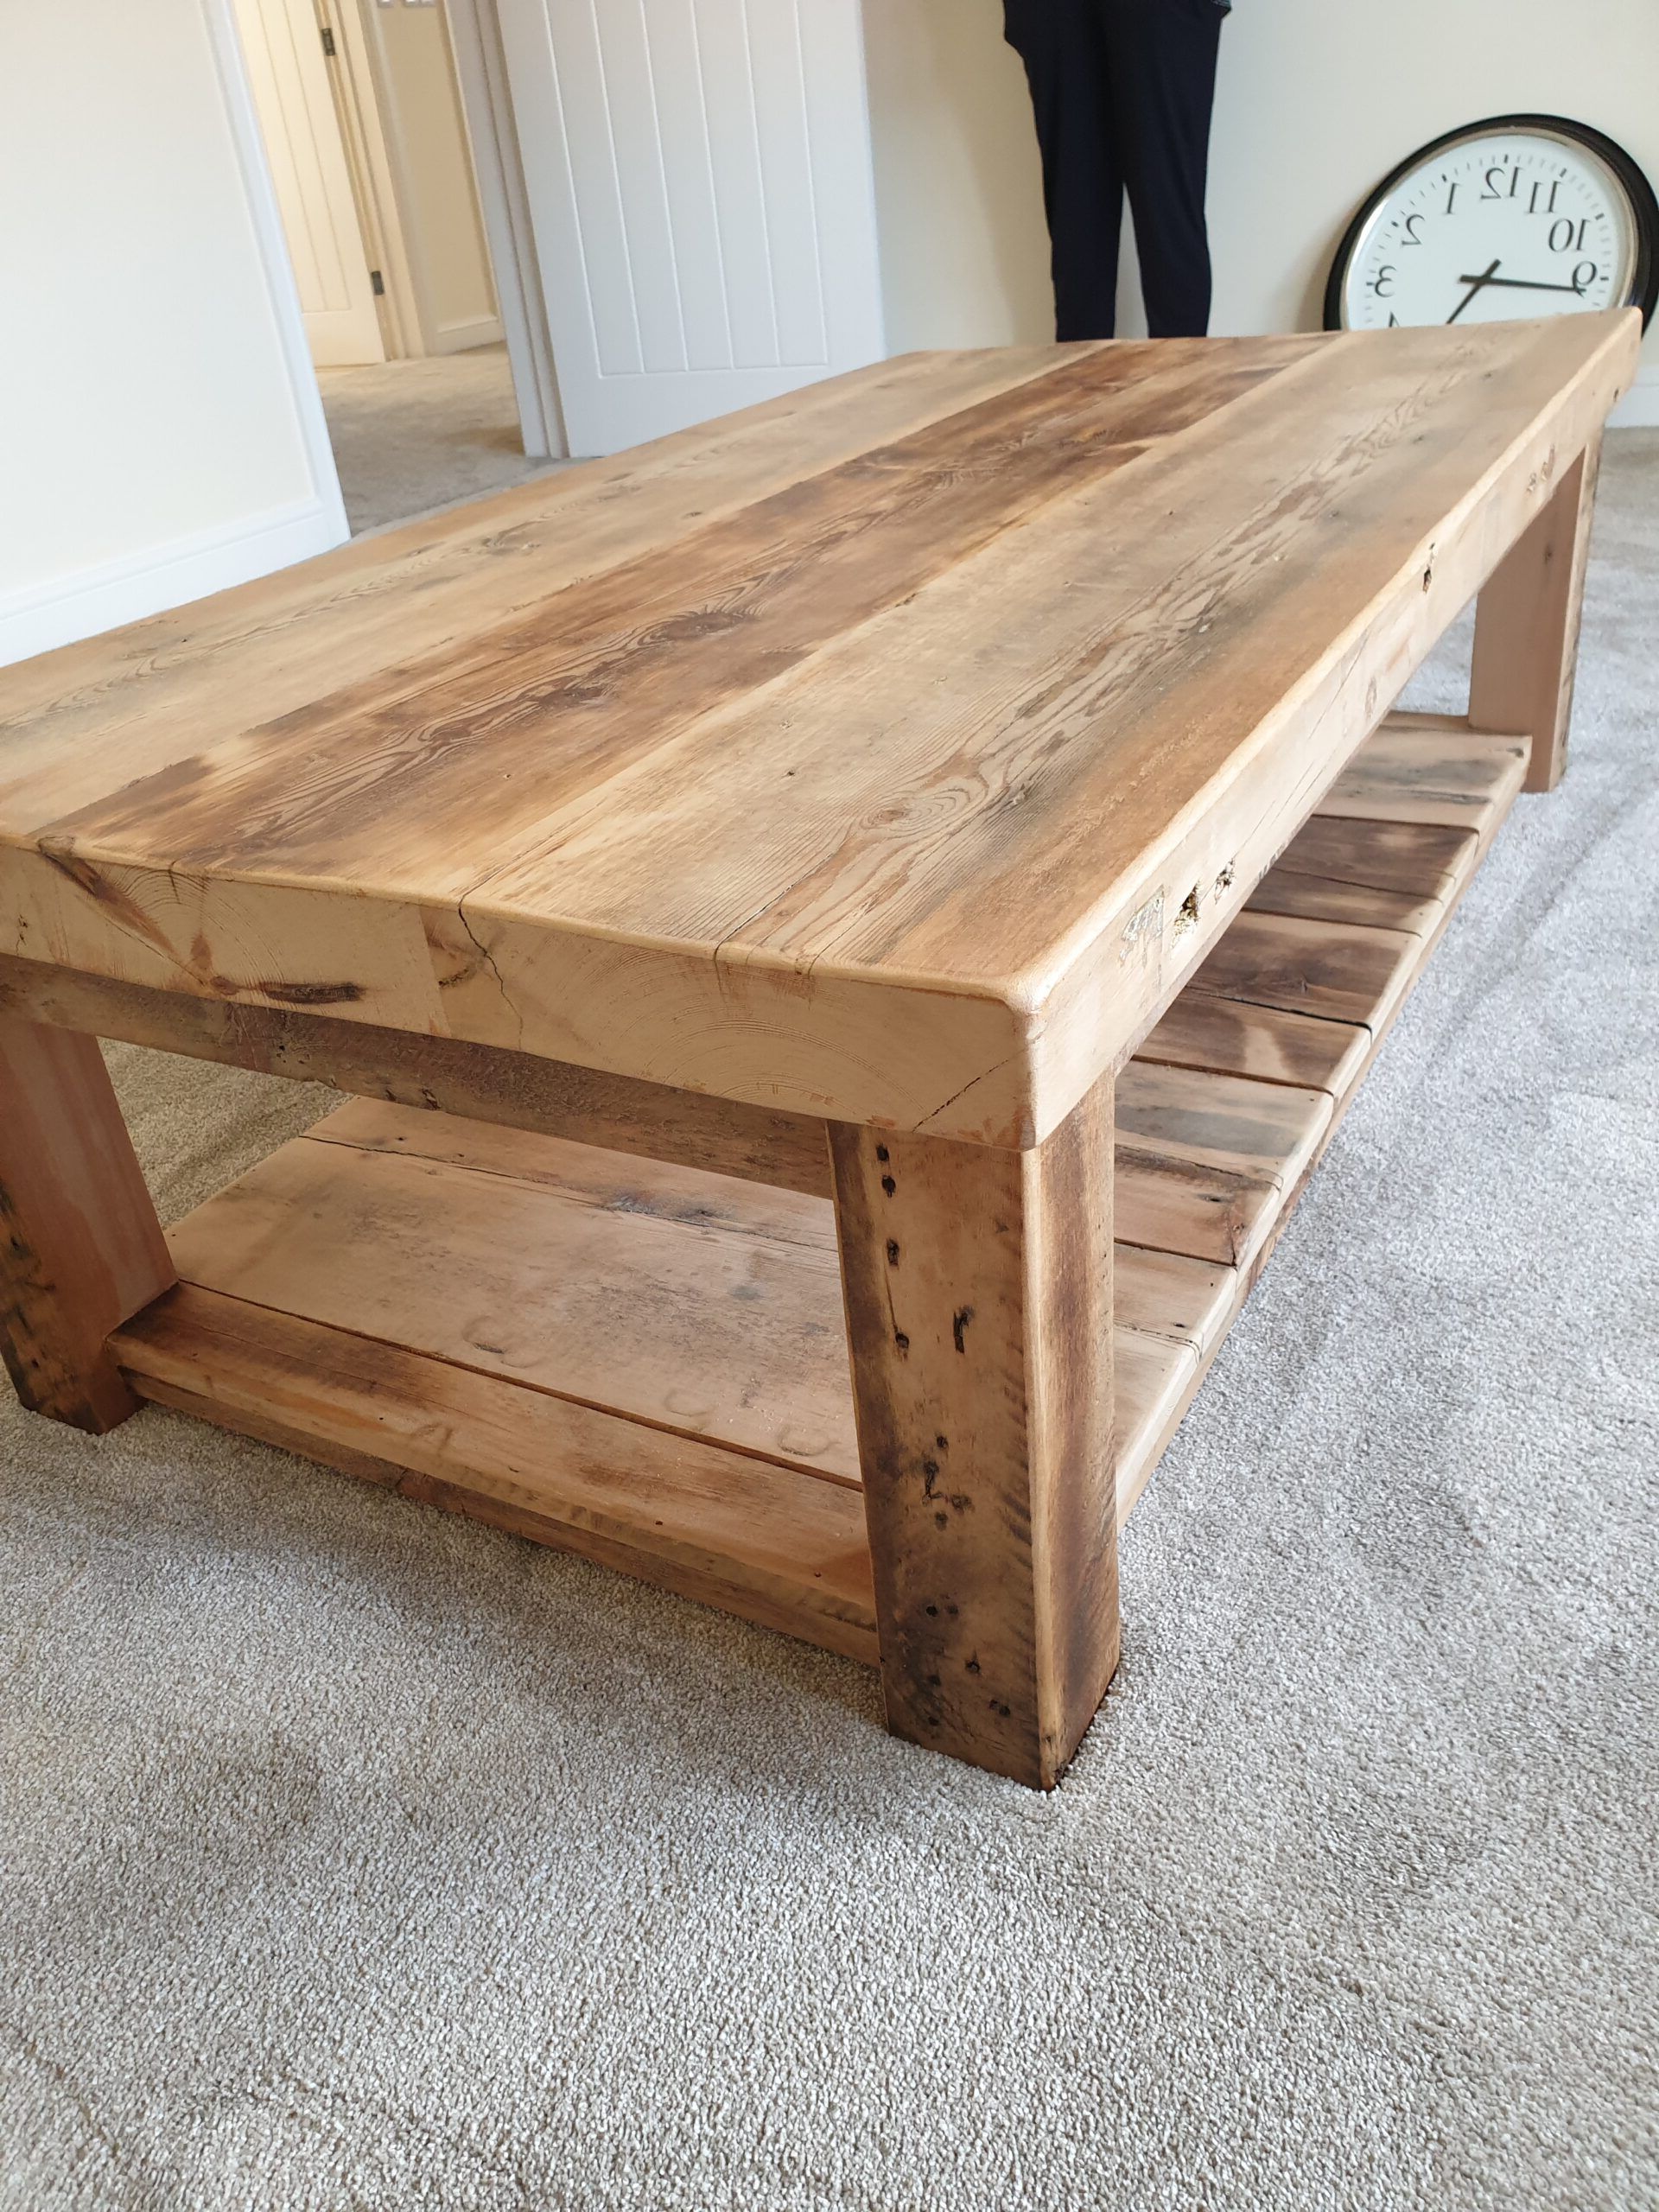 Buy Rustic Wood Coffee Table Made From Reclaimed Timber With Fashionable Rustic Wood Coffee Tables (Photo 3 of 10)